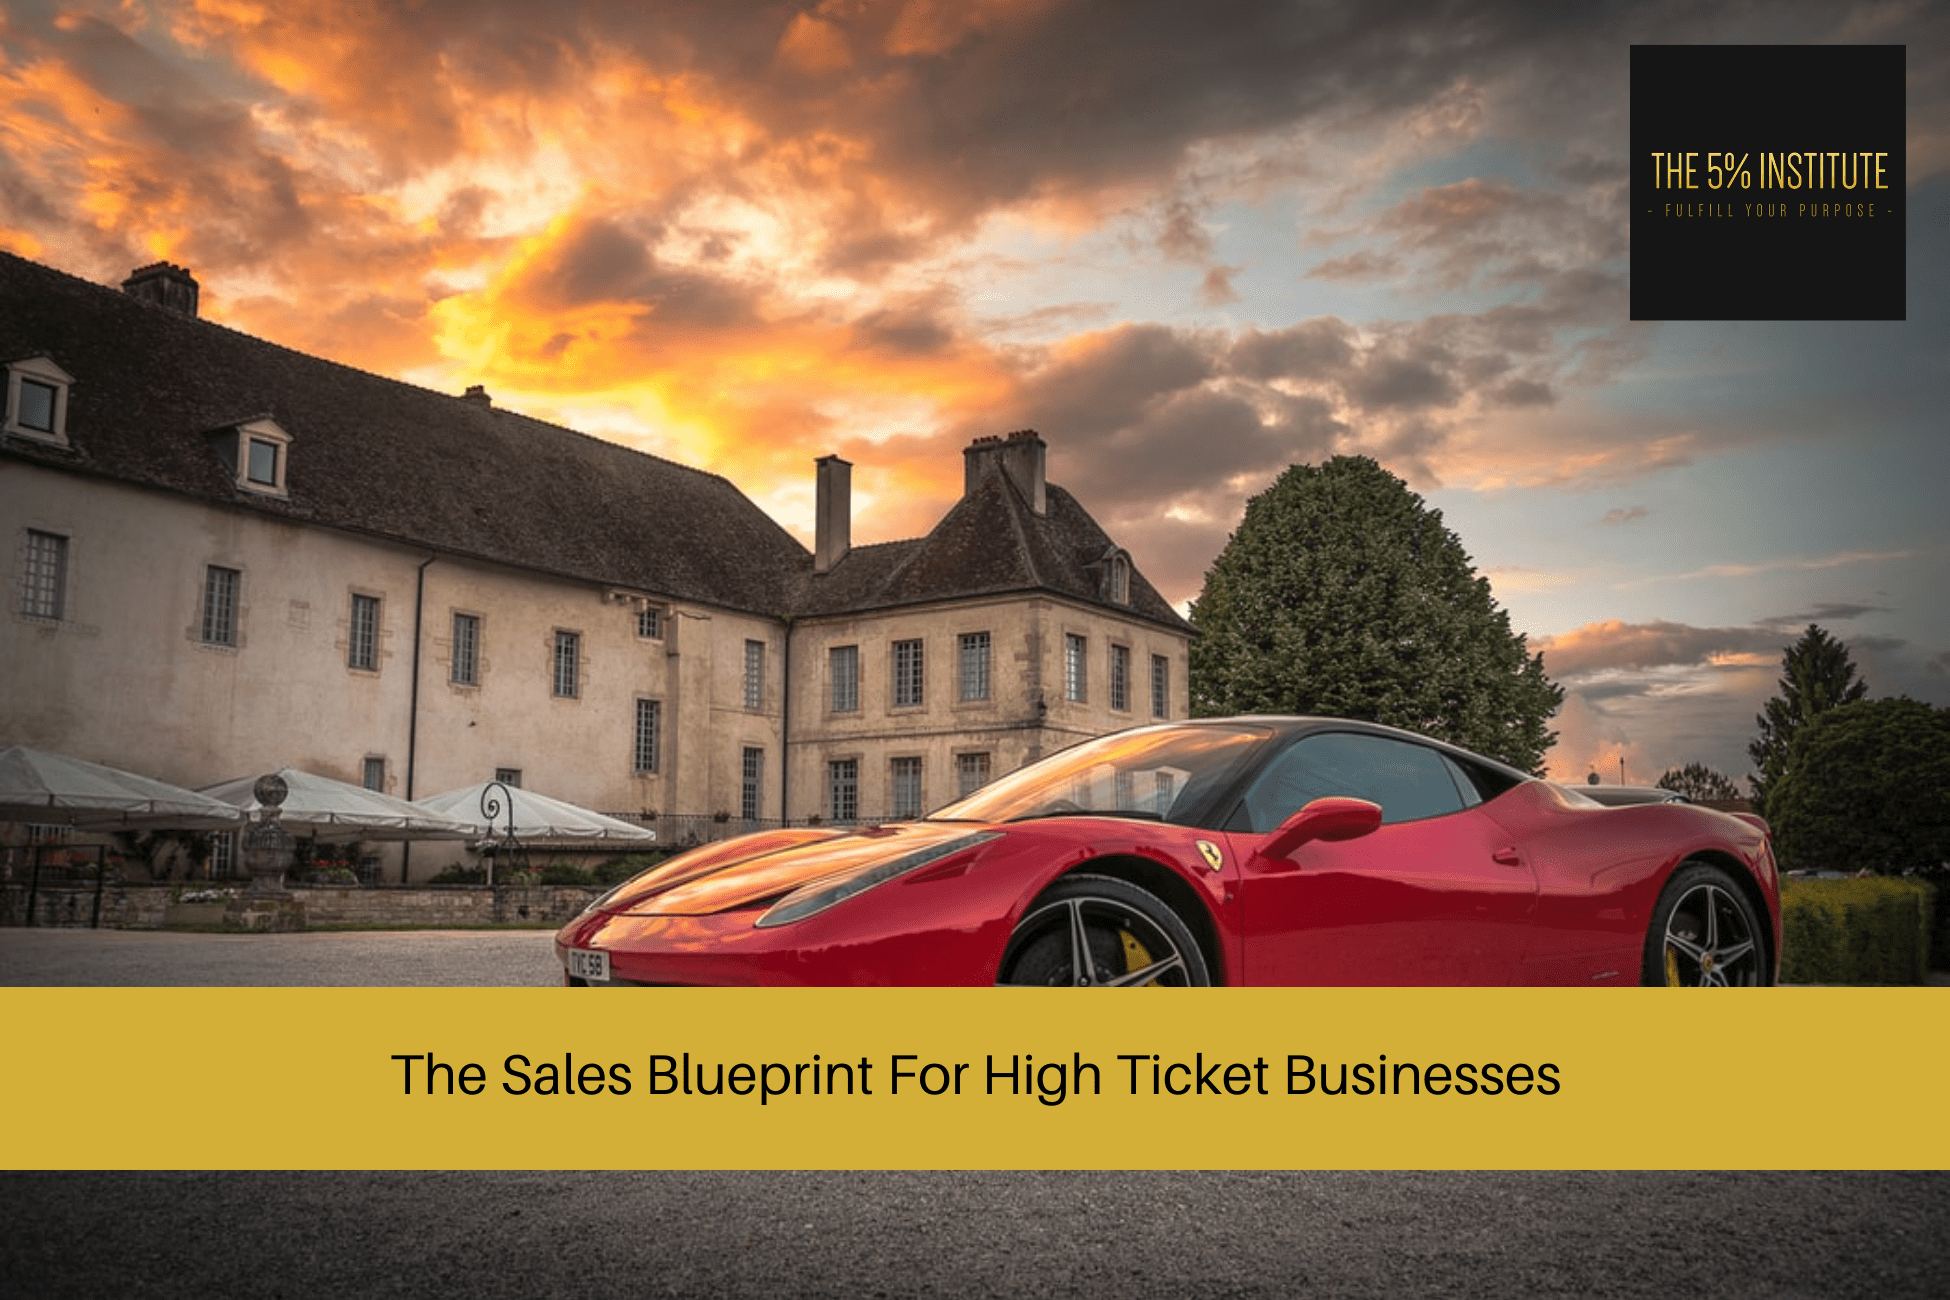 The Sales Blueprint For High Ticket Businesses